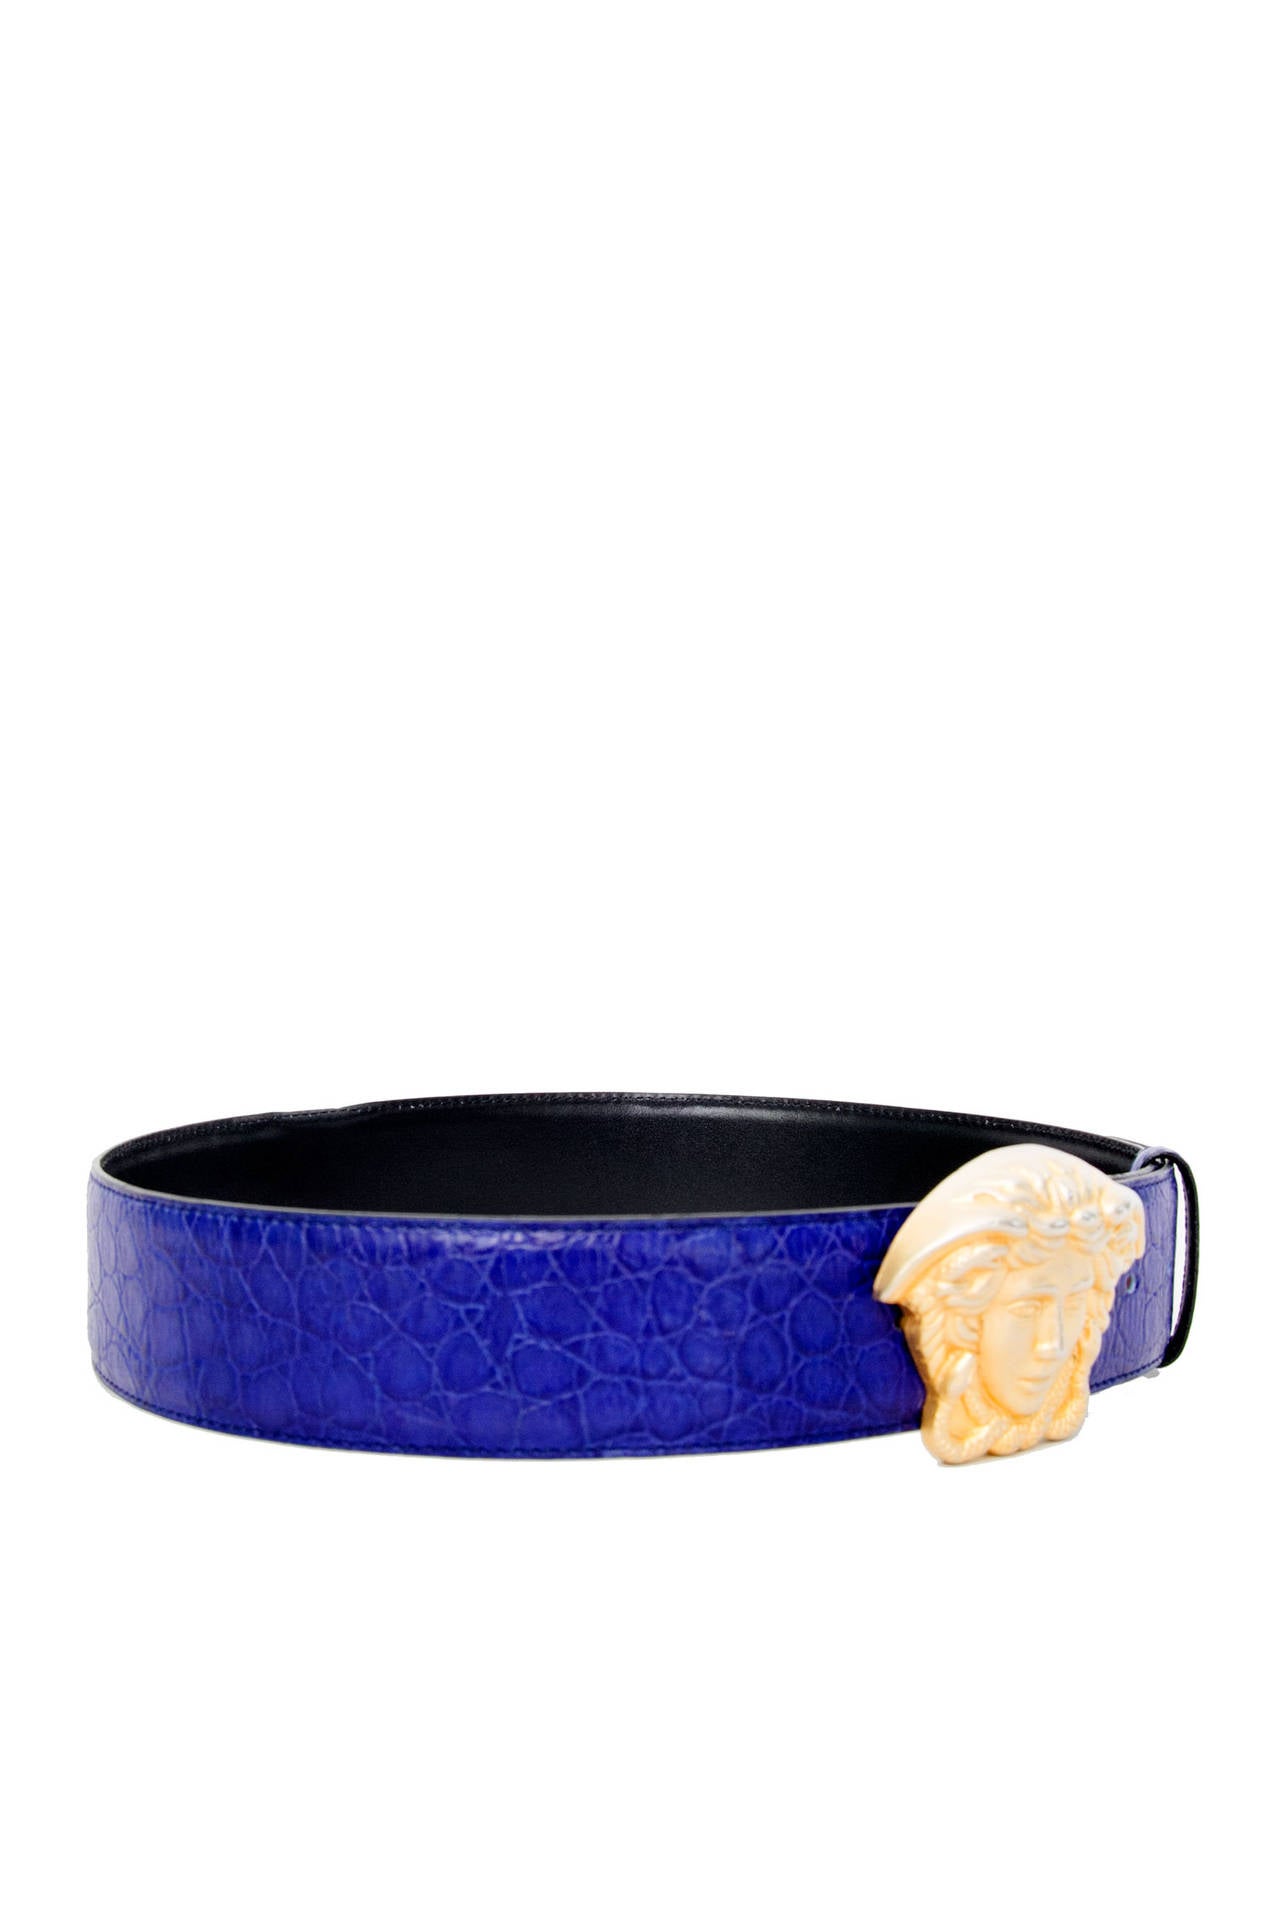 A late 1980s Gianni Versace royal blue leather belt with an exaggerated gold Medusa buckle.